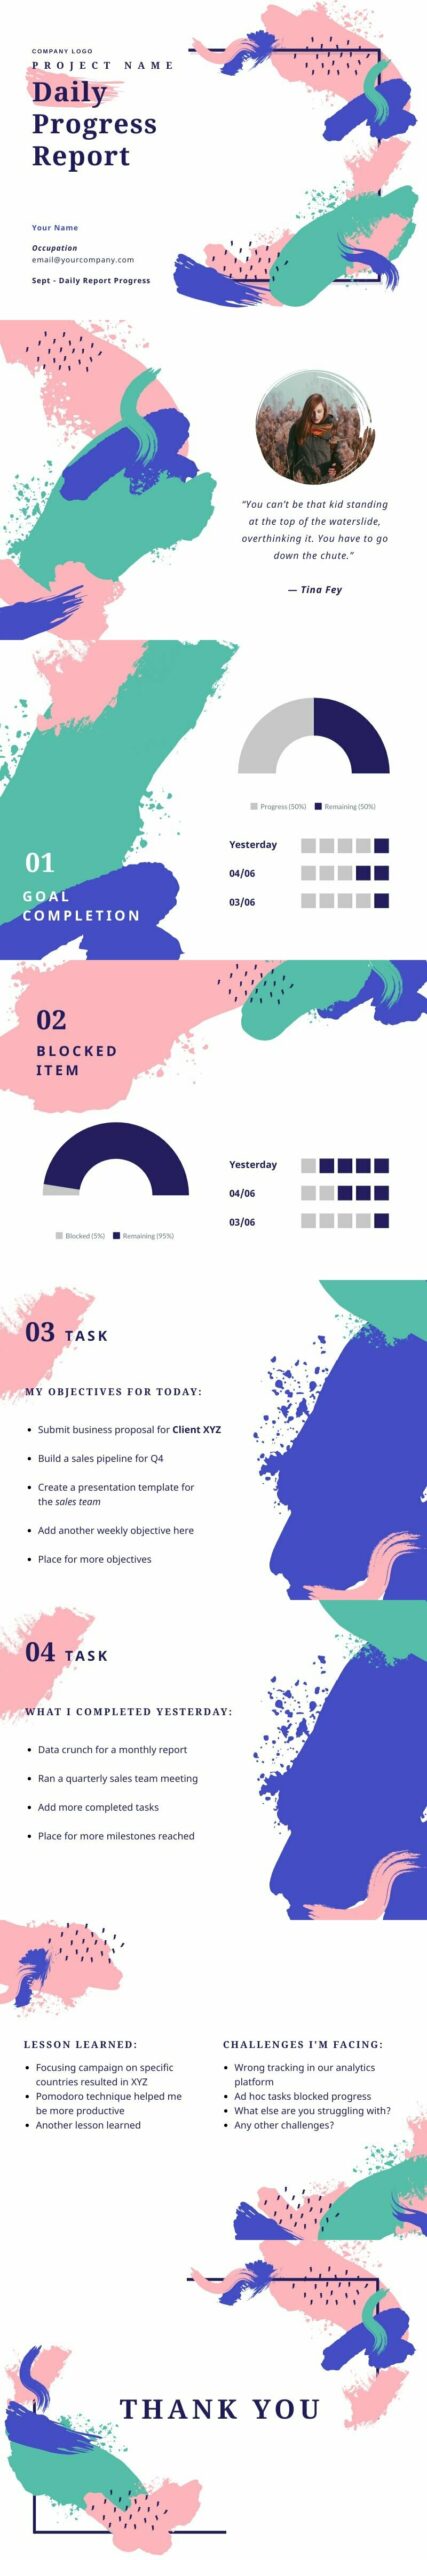 Presentations Template for Daily Progress